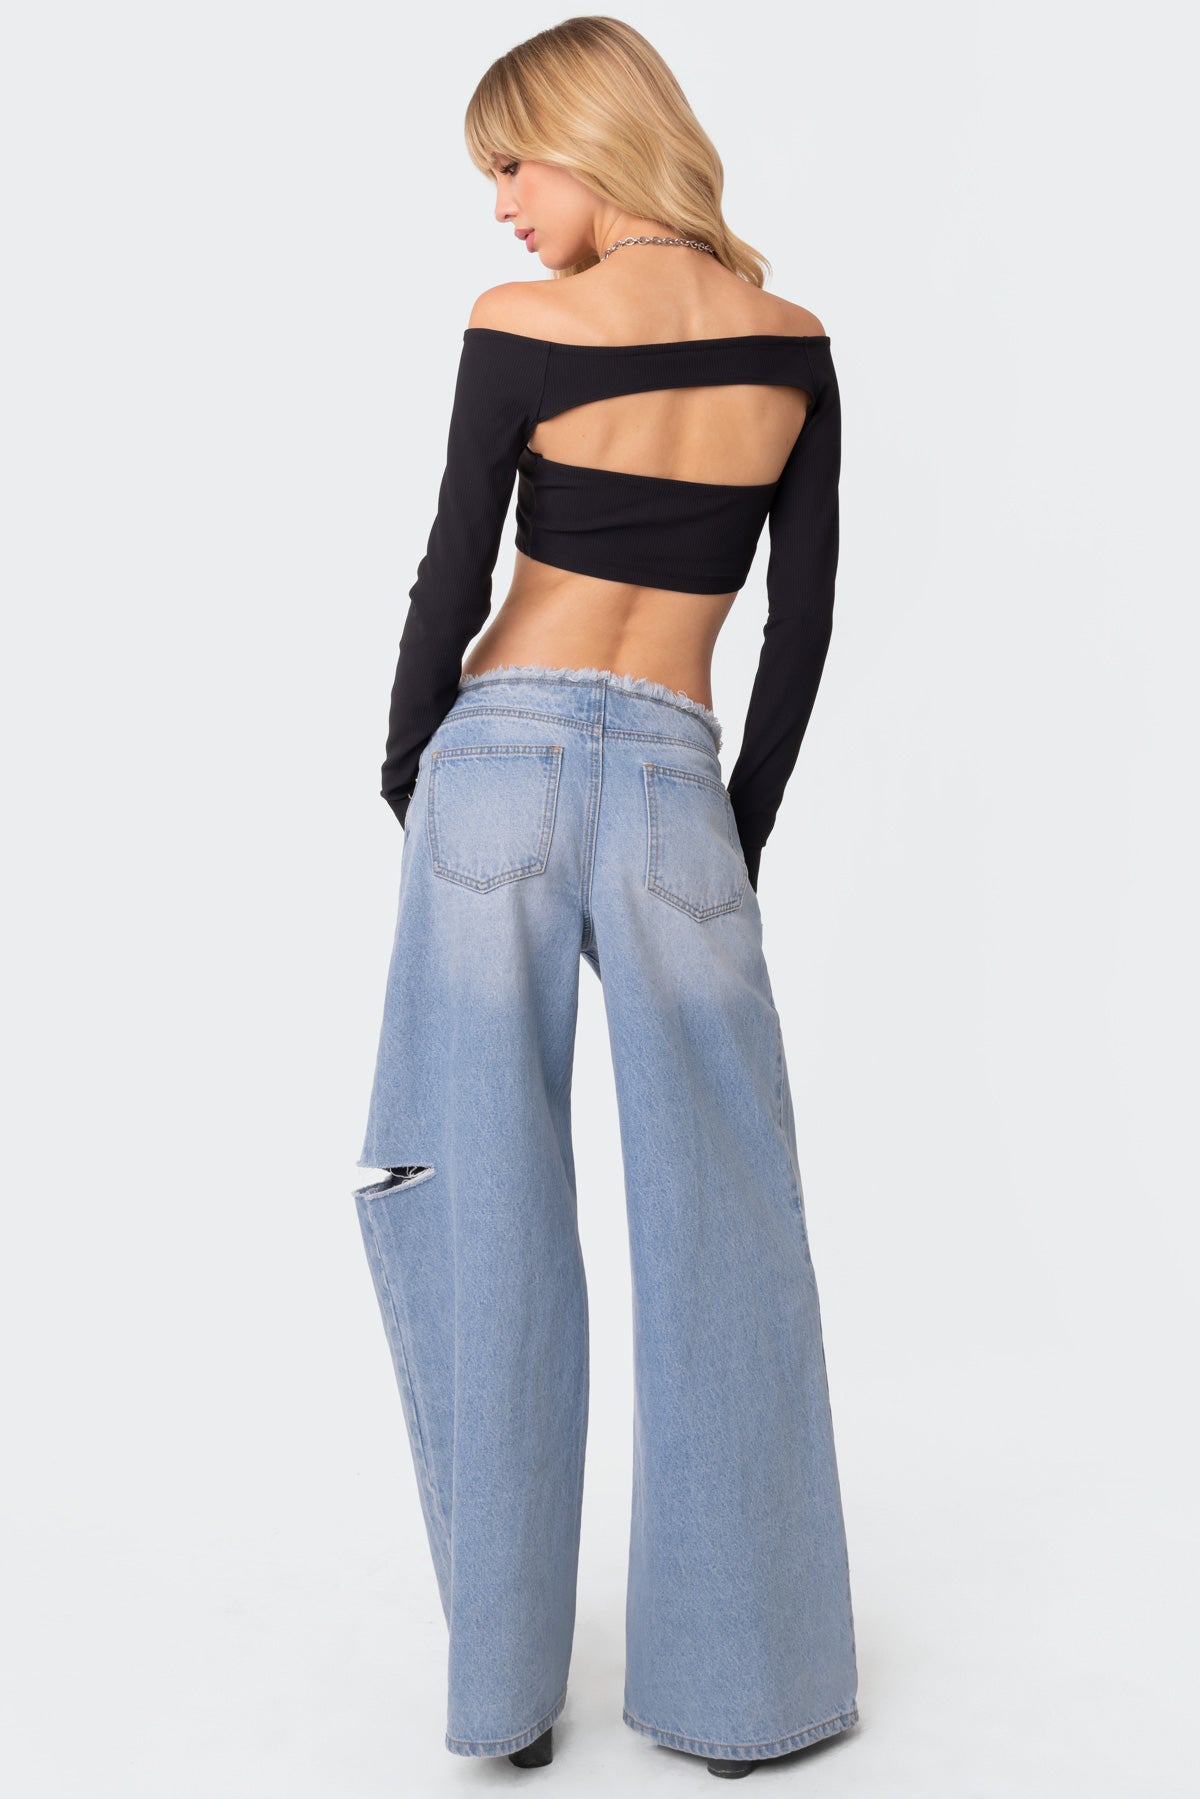 Reign Two Piece Ribbed Crop Top